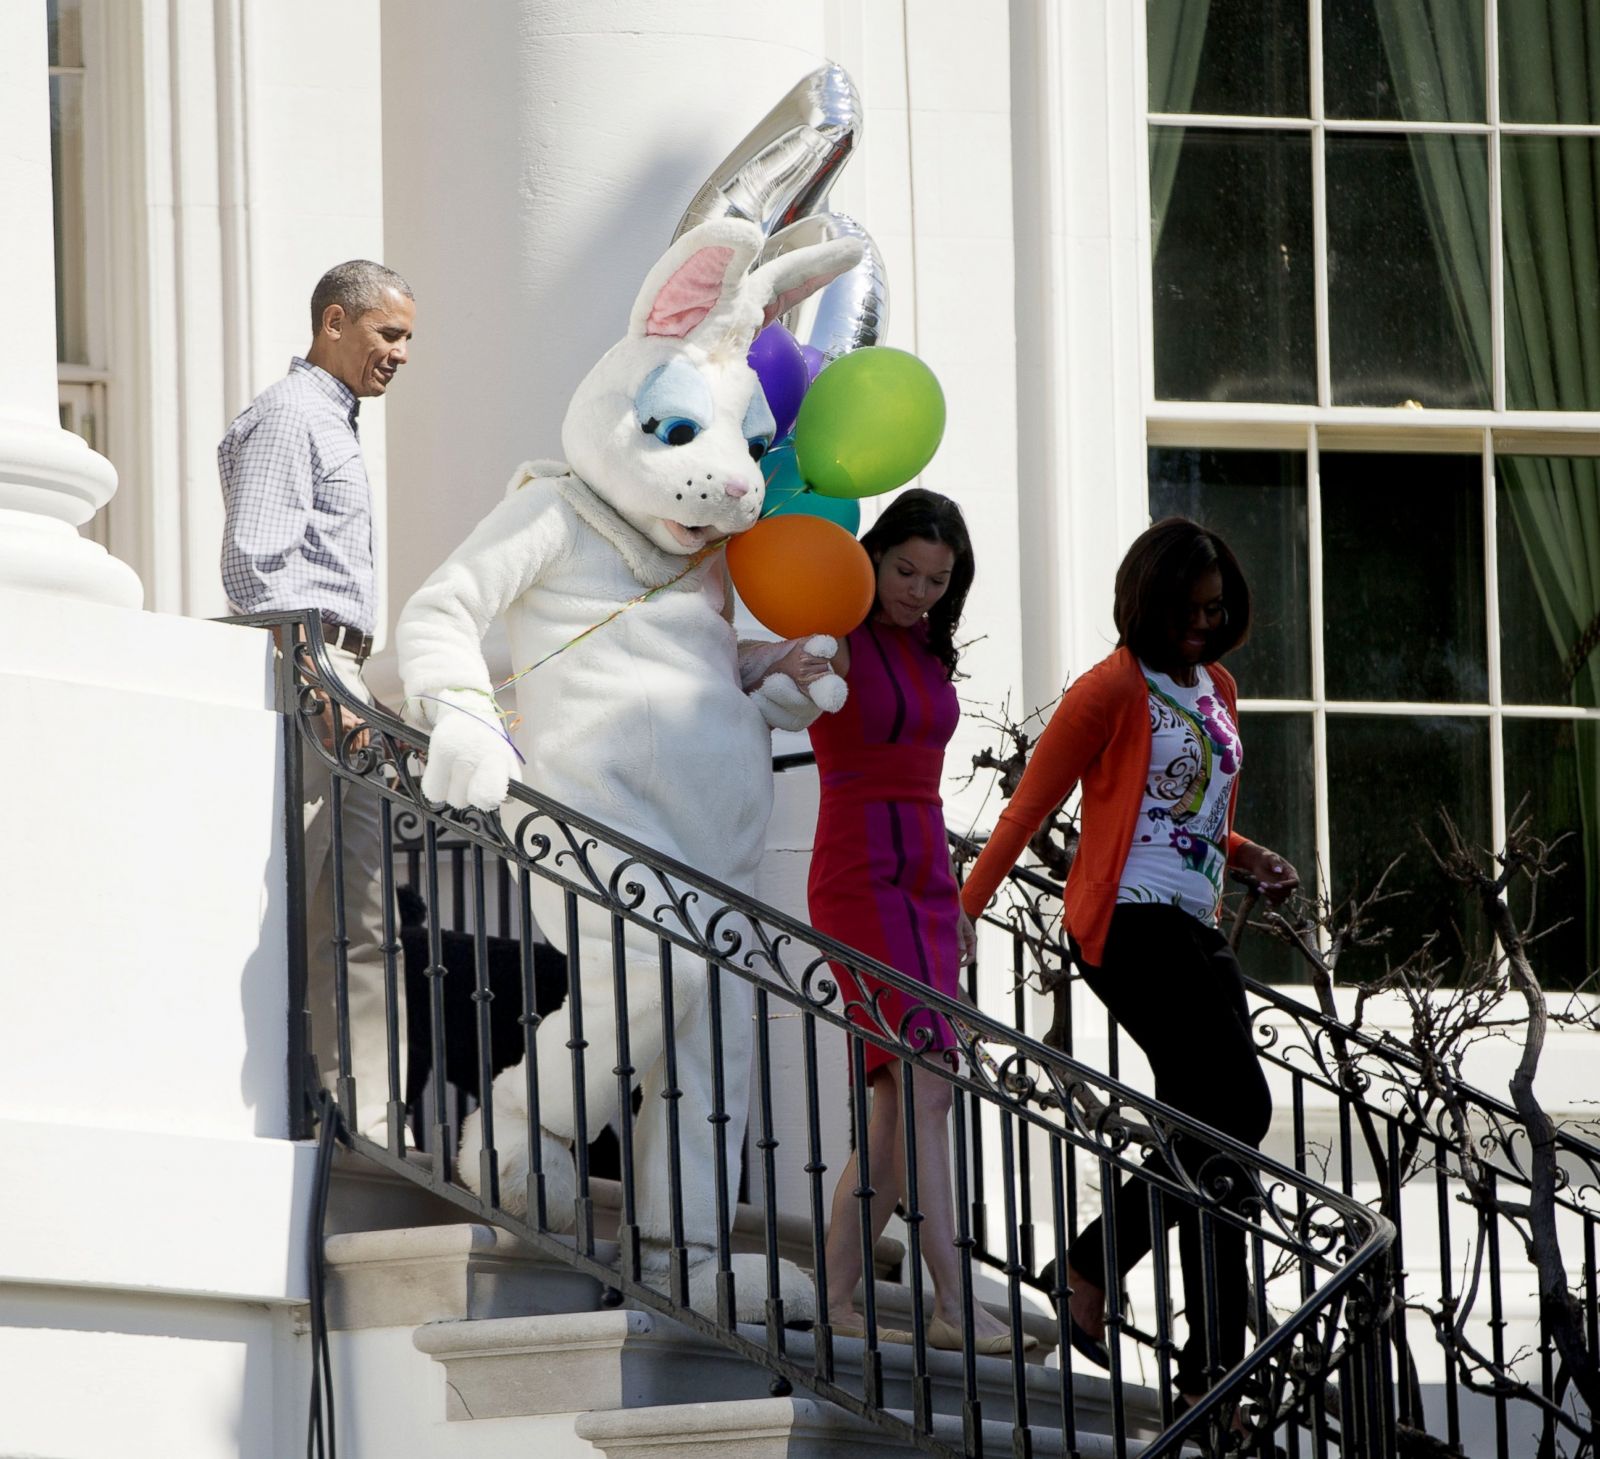 Eggcellent Photos of the White House Easter Egg Roll Photos ABC News